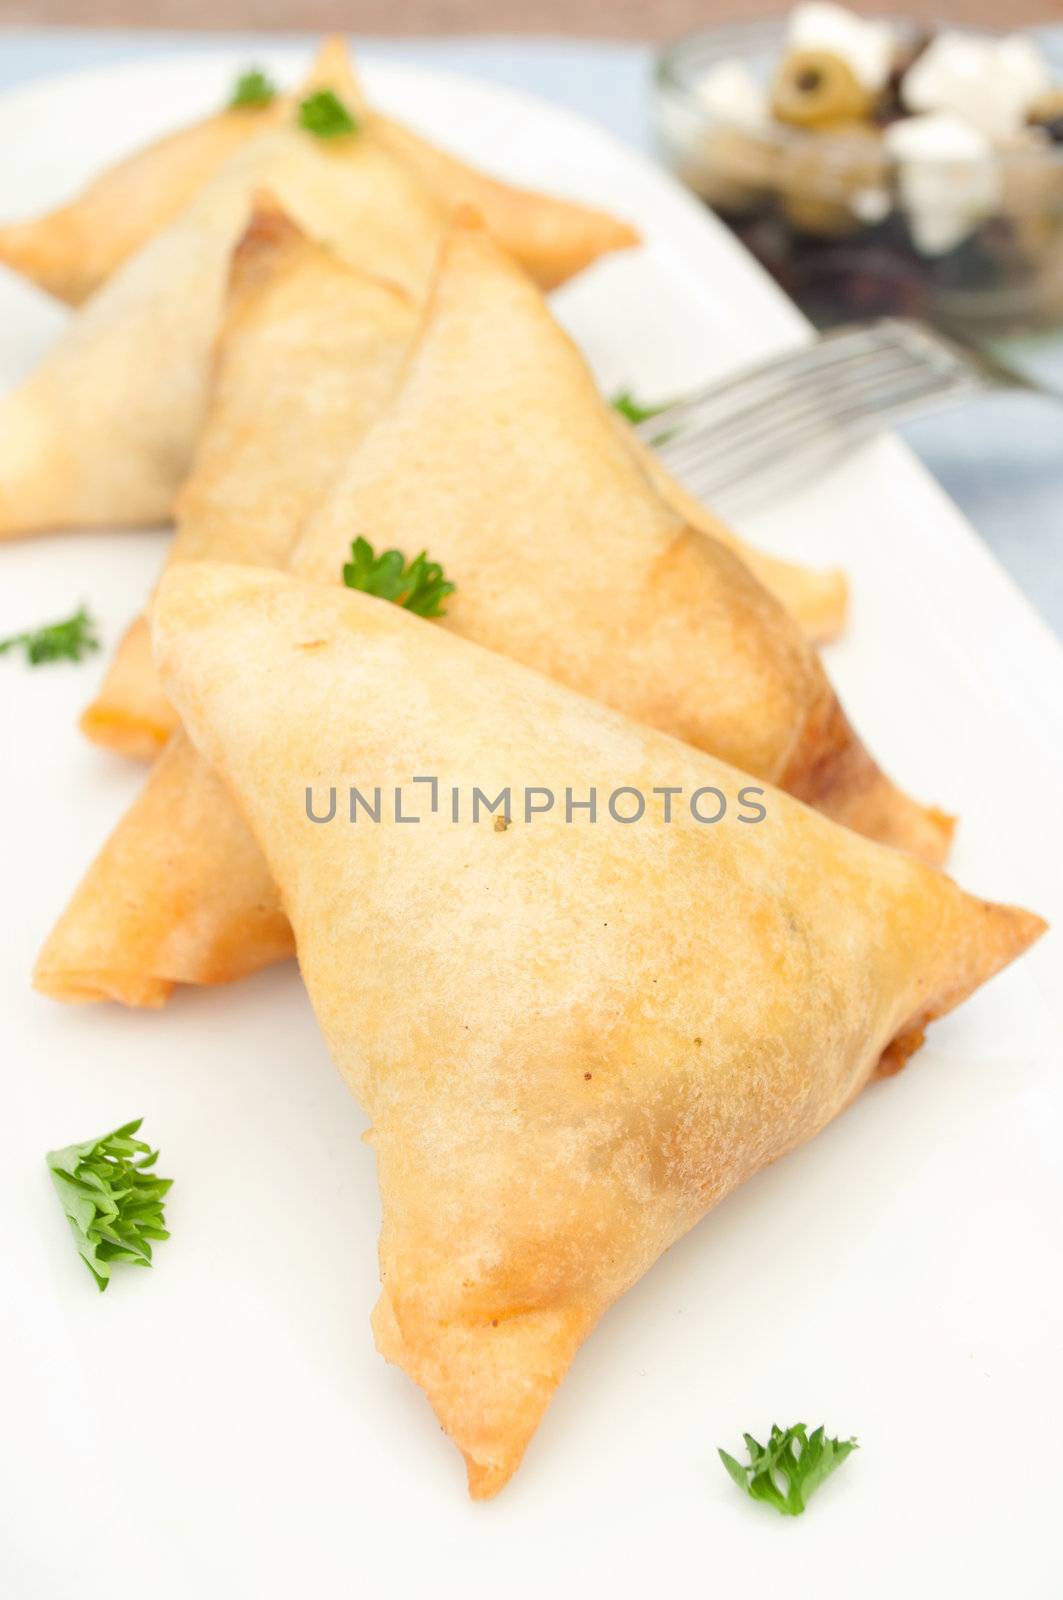 Feta cheese and spinach pastries 